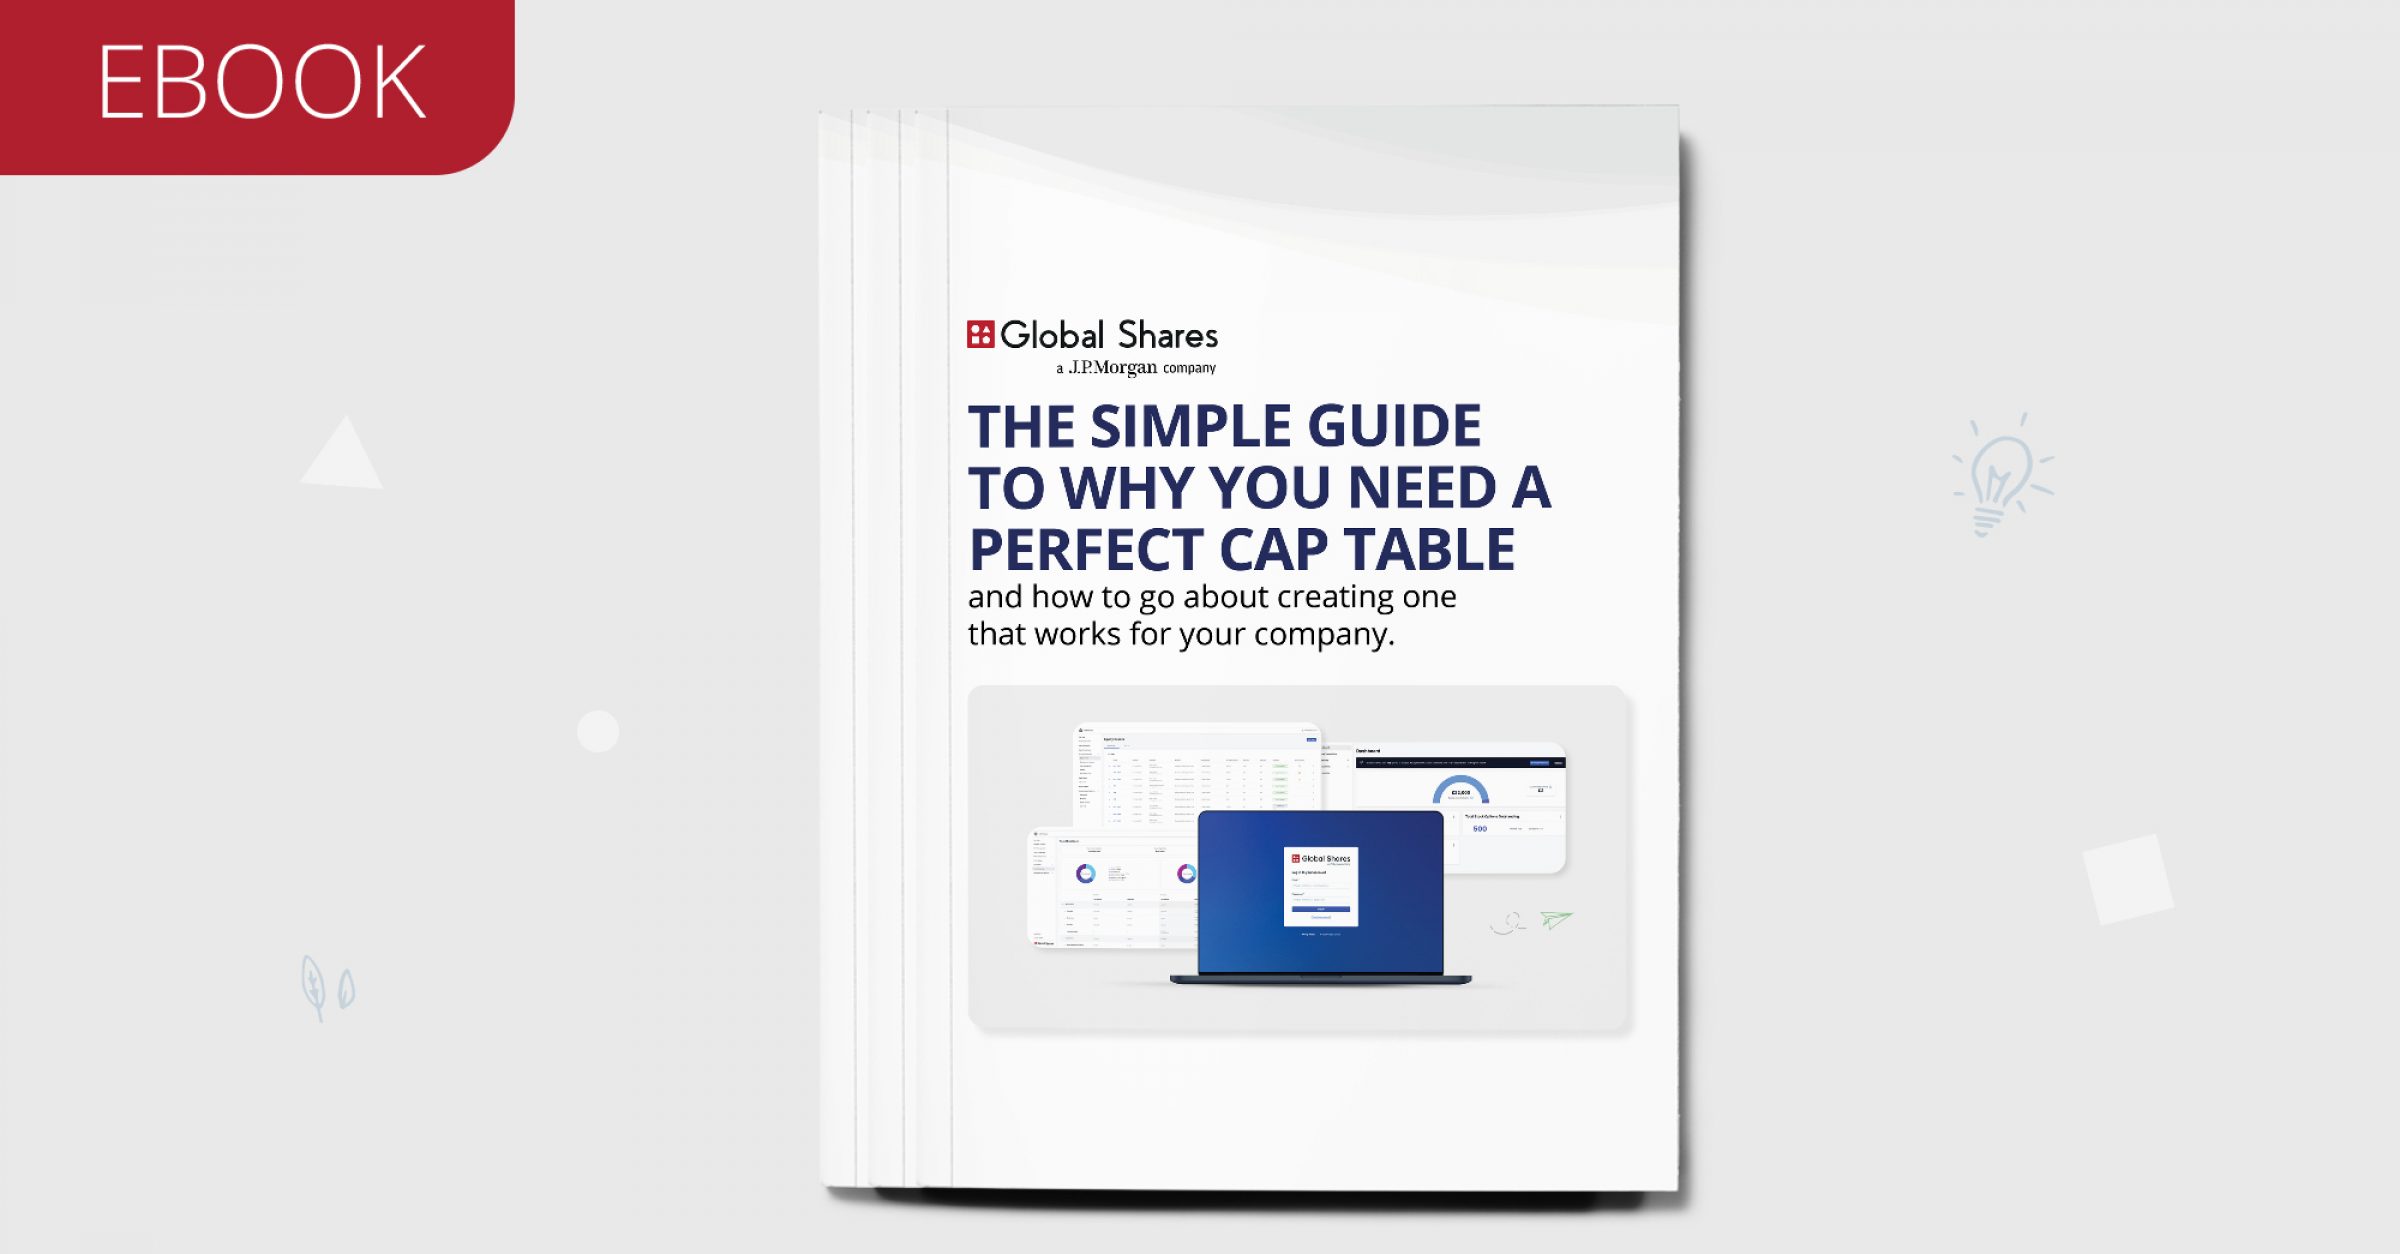 Free eBook: The Simple Guide To Why You Need A Perfect Cap Table (and how to go about creating one that works for your company)